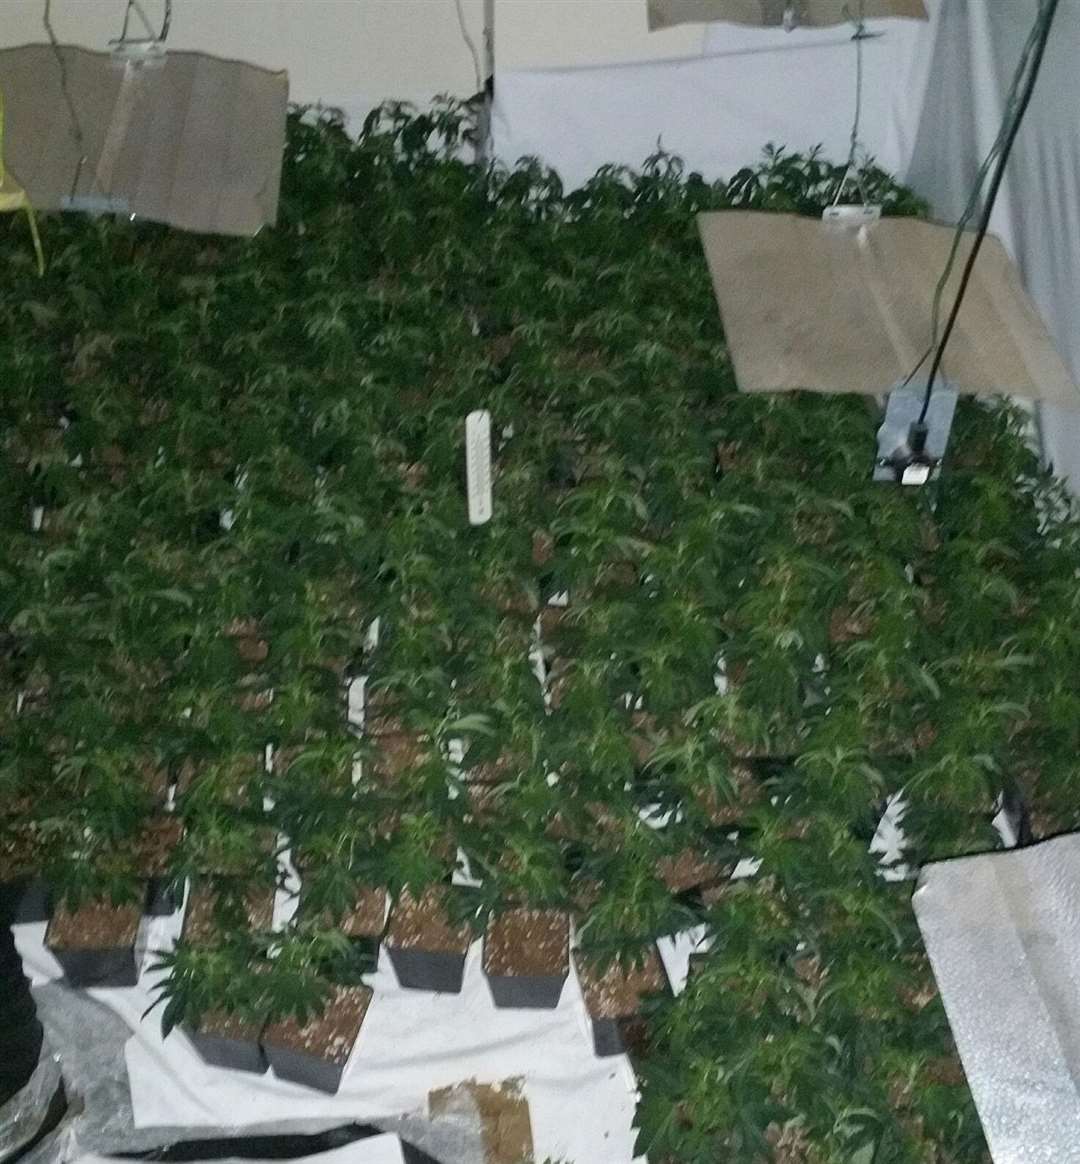 Two men have been charged and will appear in court in Canterbury accused of growing cannabis inside the property. Picture: Kent Police